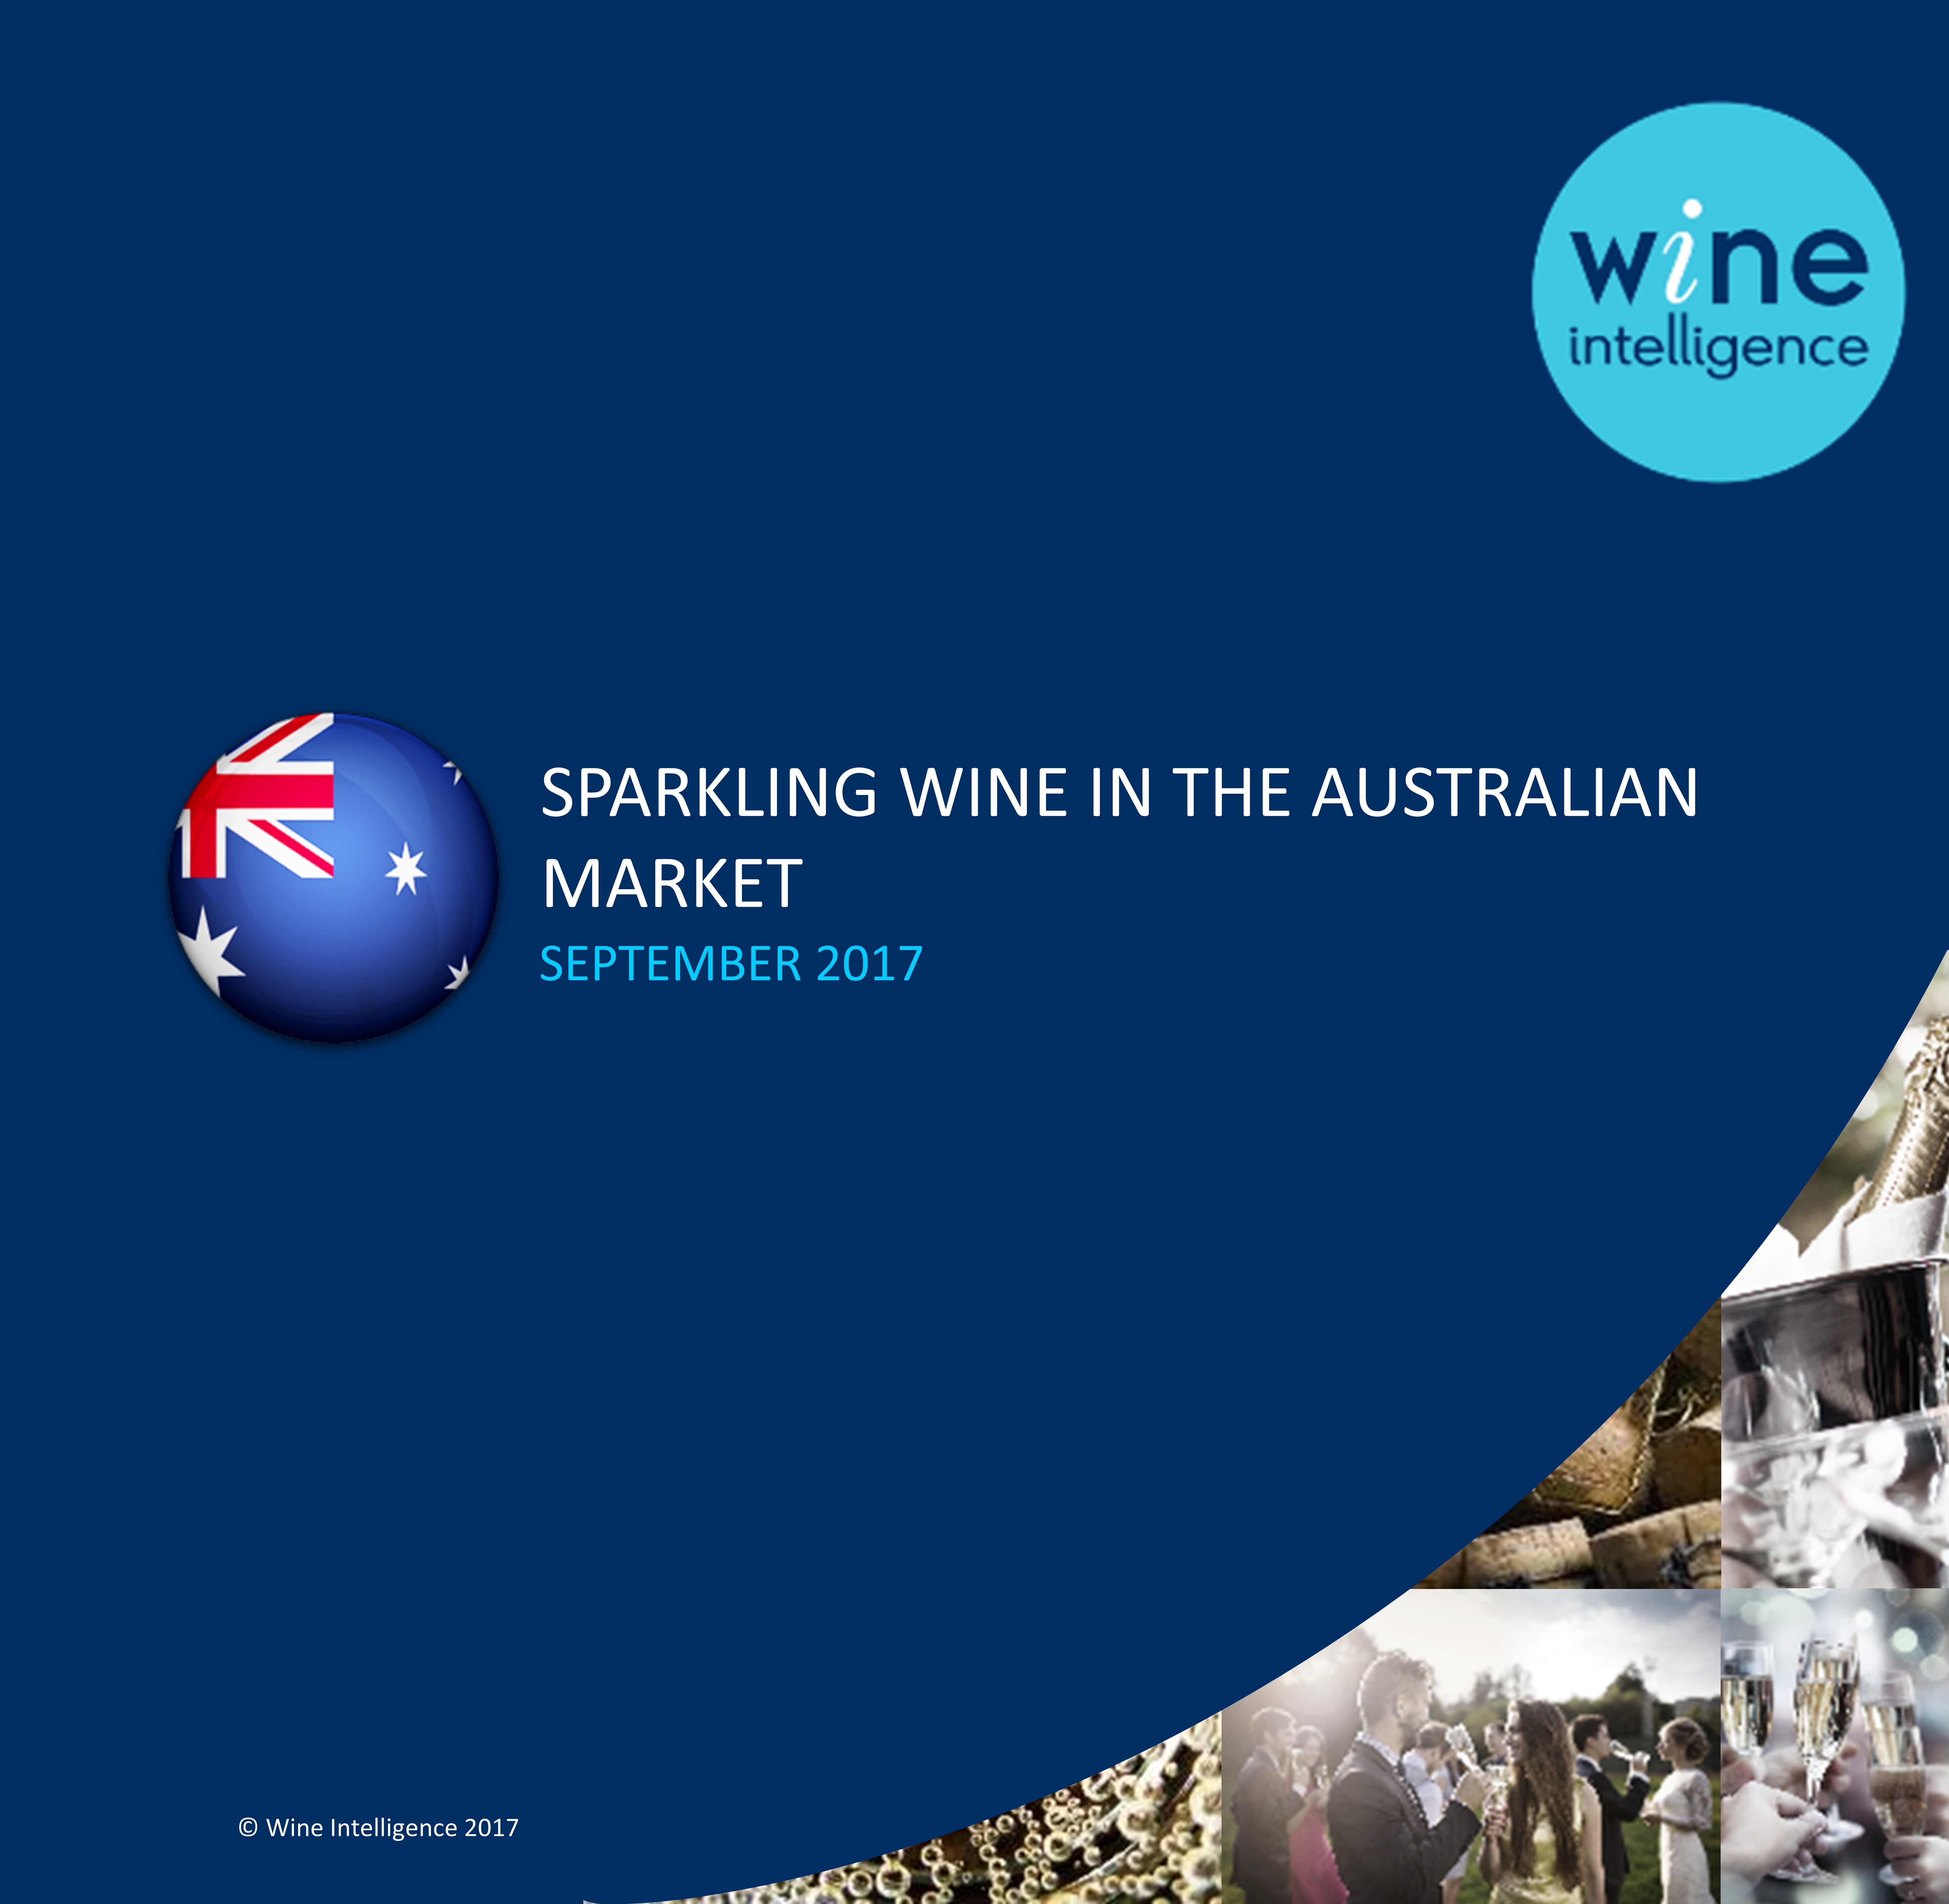 Sparkling wine in the Australian market 2017 - Keeping an open mind on closures